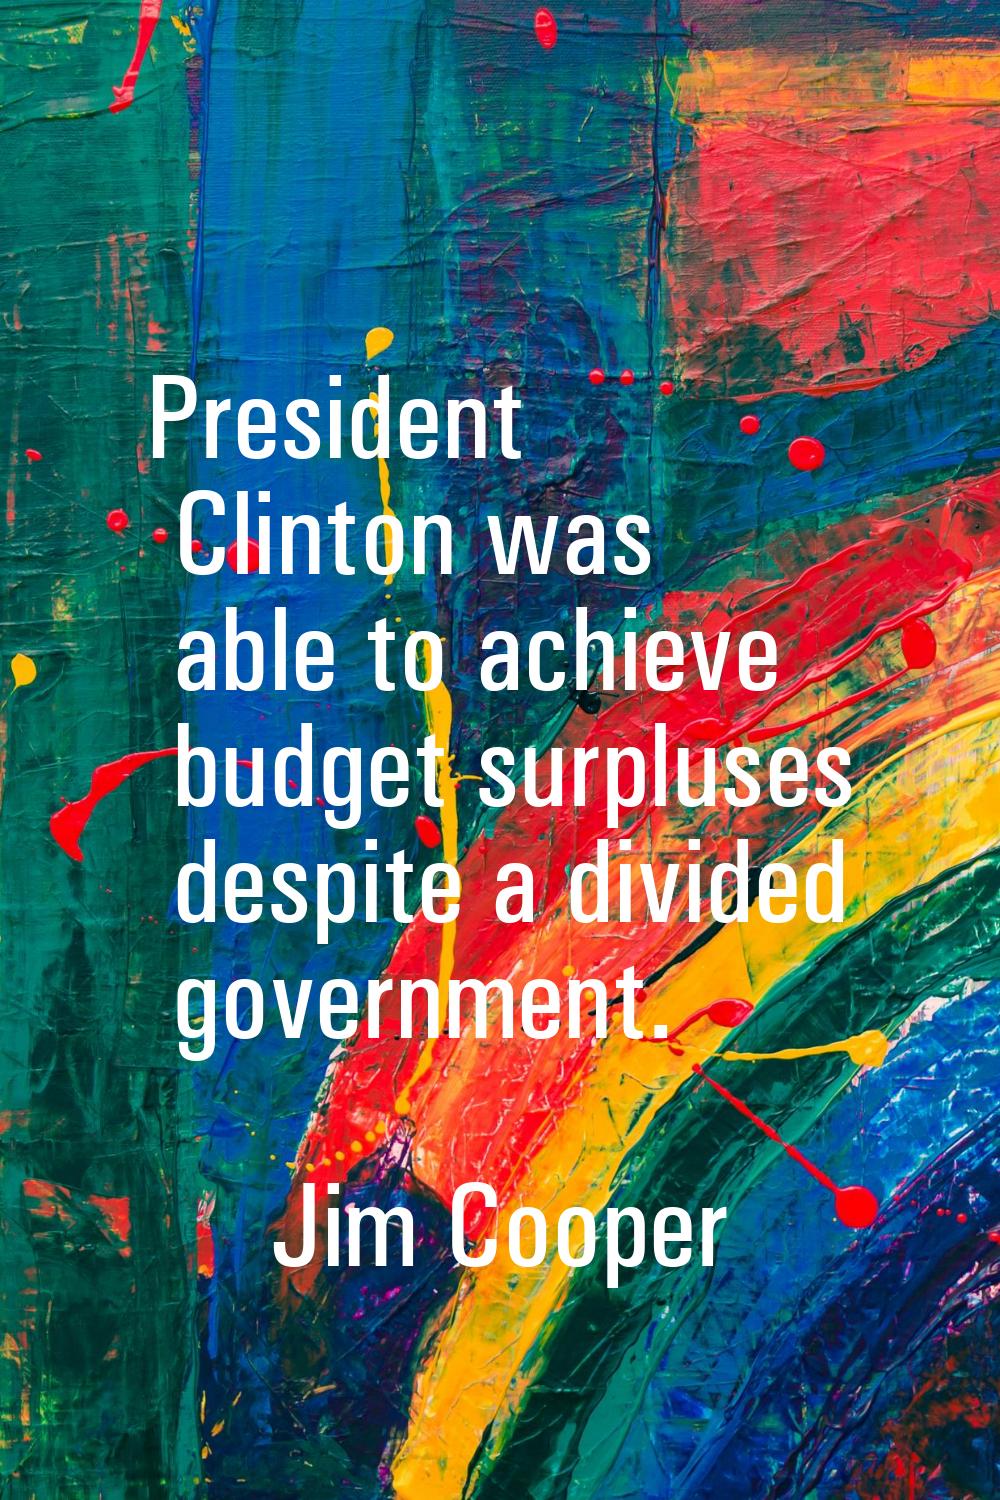 President Clinton was able to achieve budget surpluses despite a divided government.